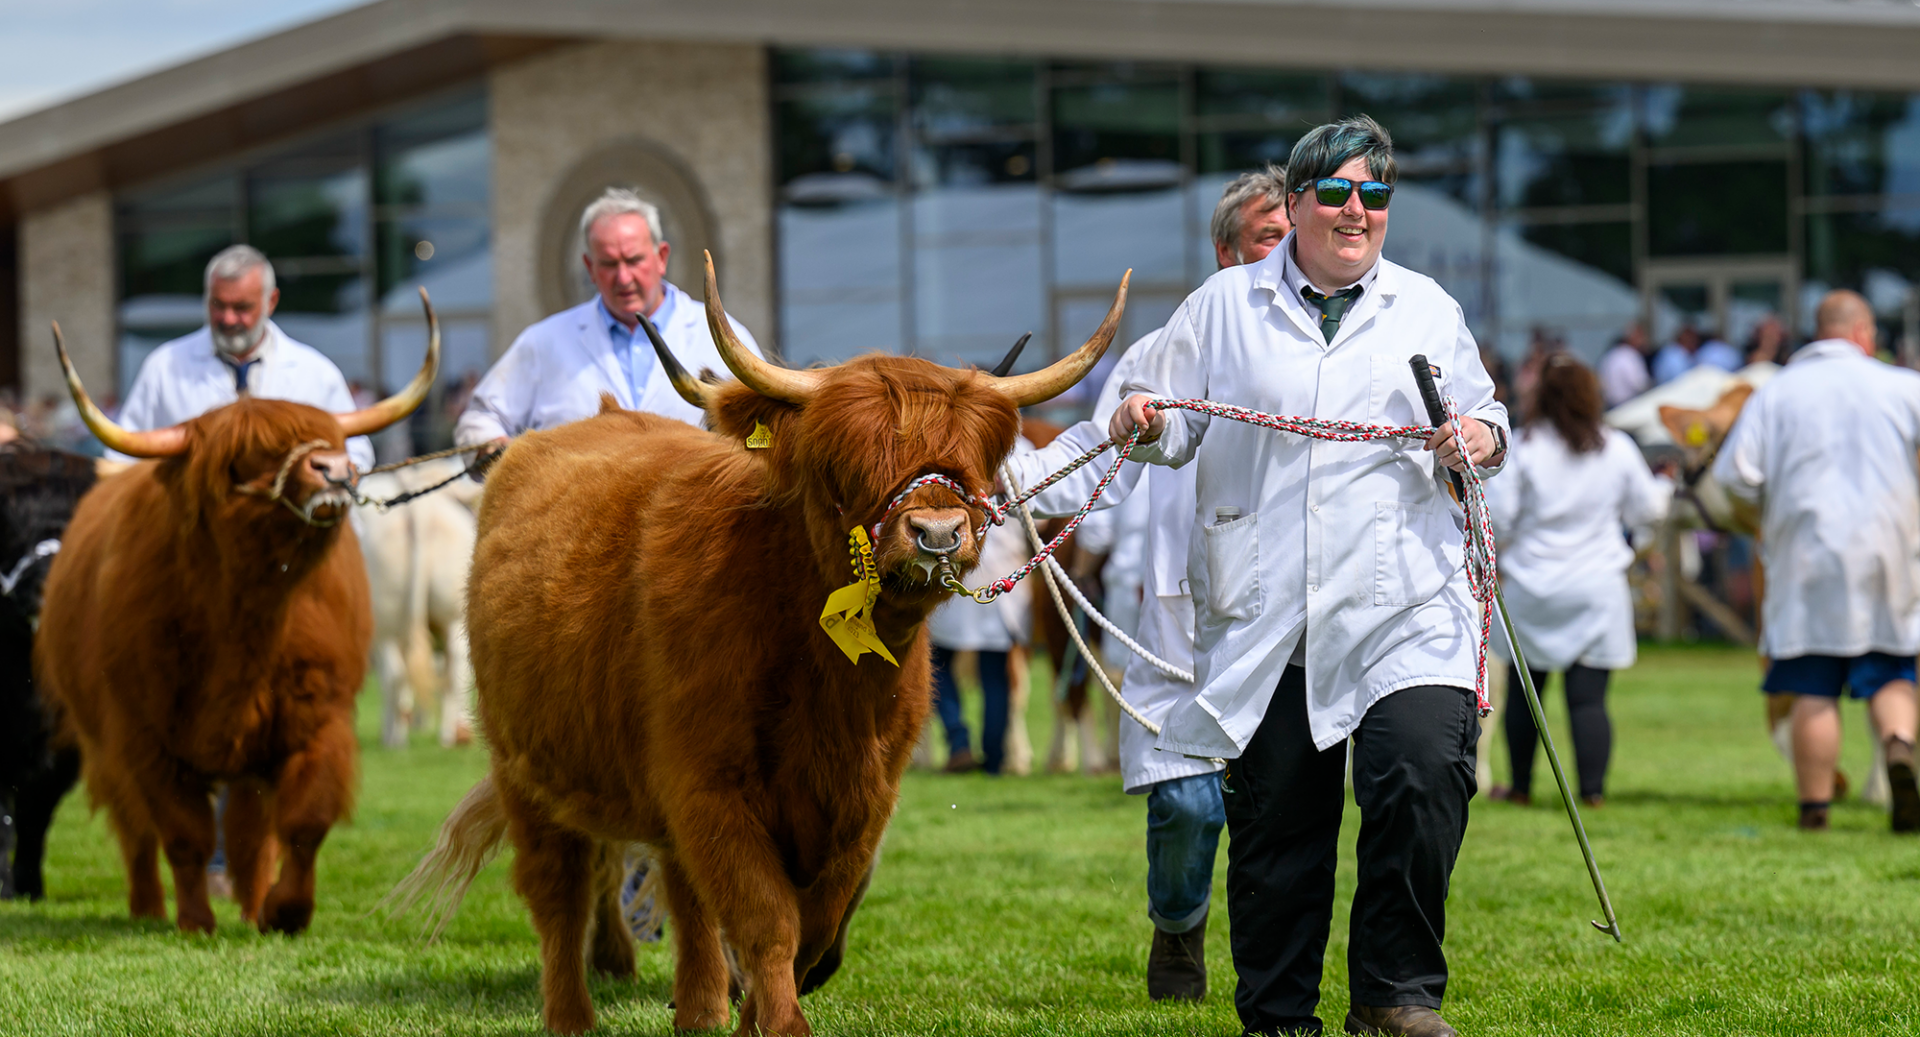 Highland Cow prize winners being paraded around arena